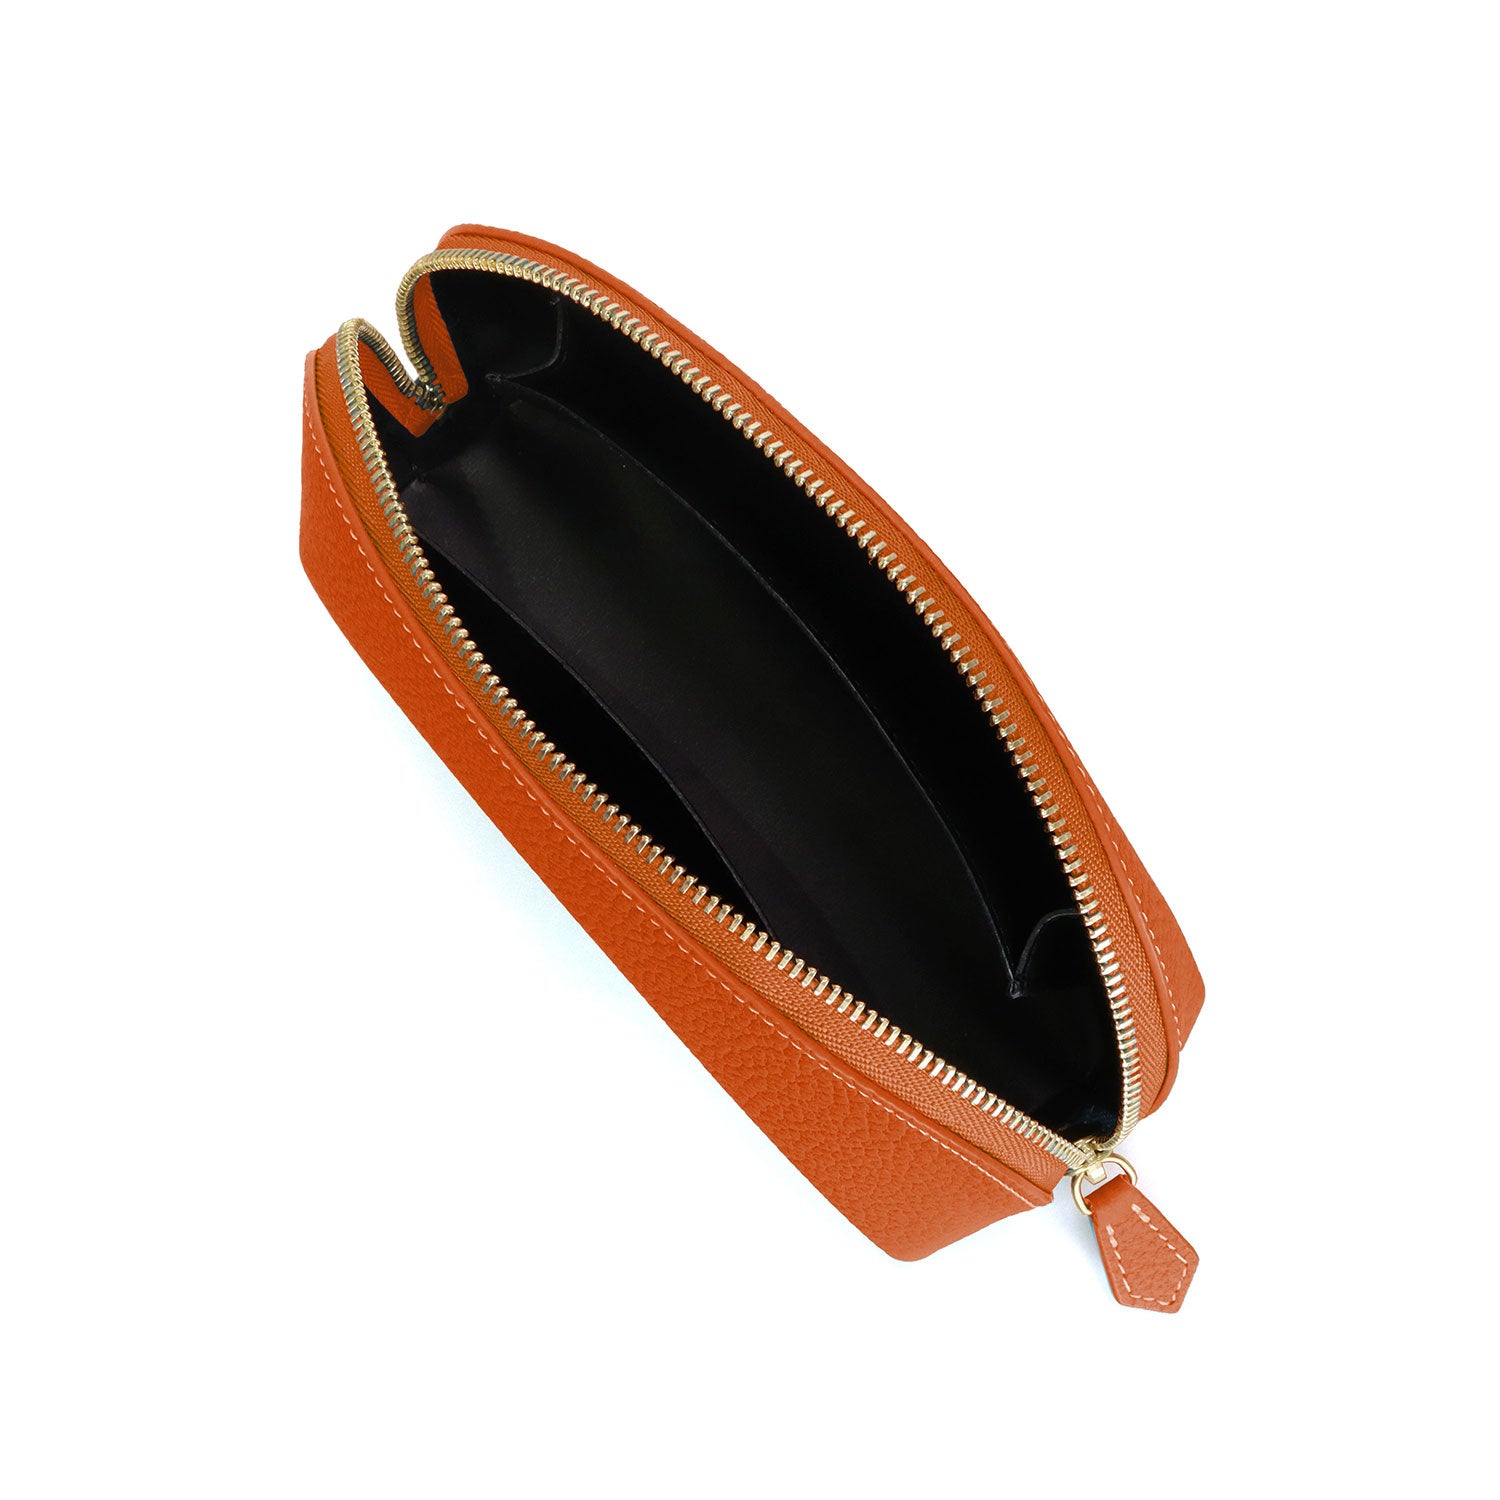 Cosmetic pouch in shrink leather (small)